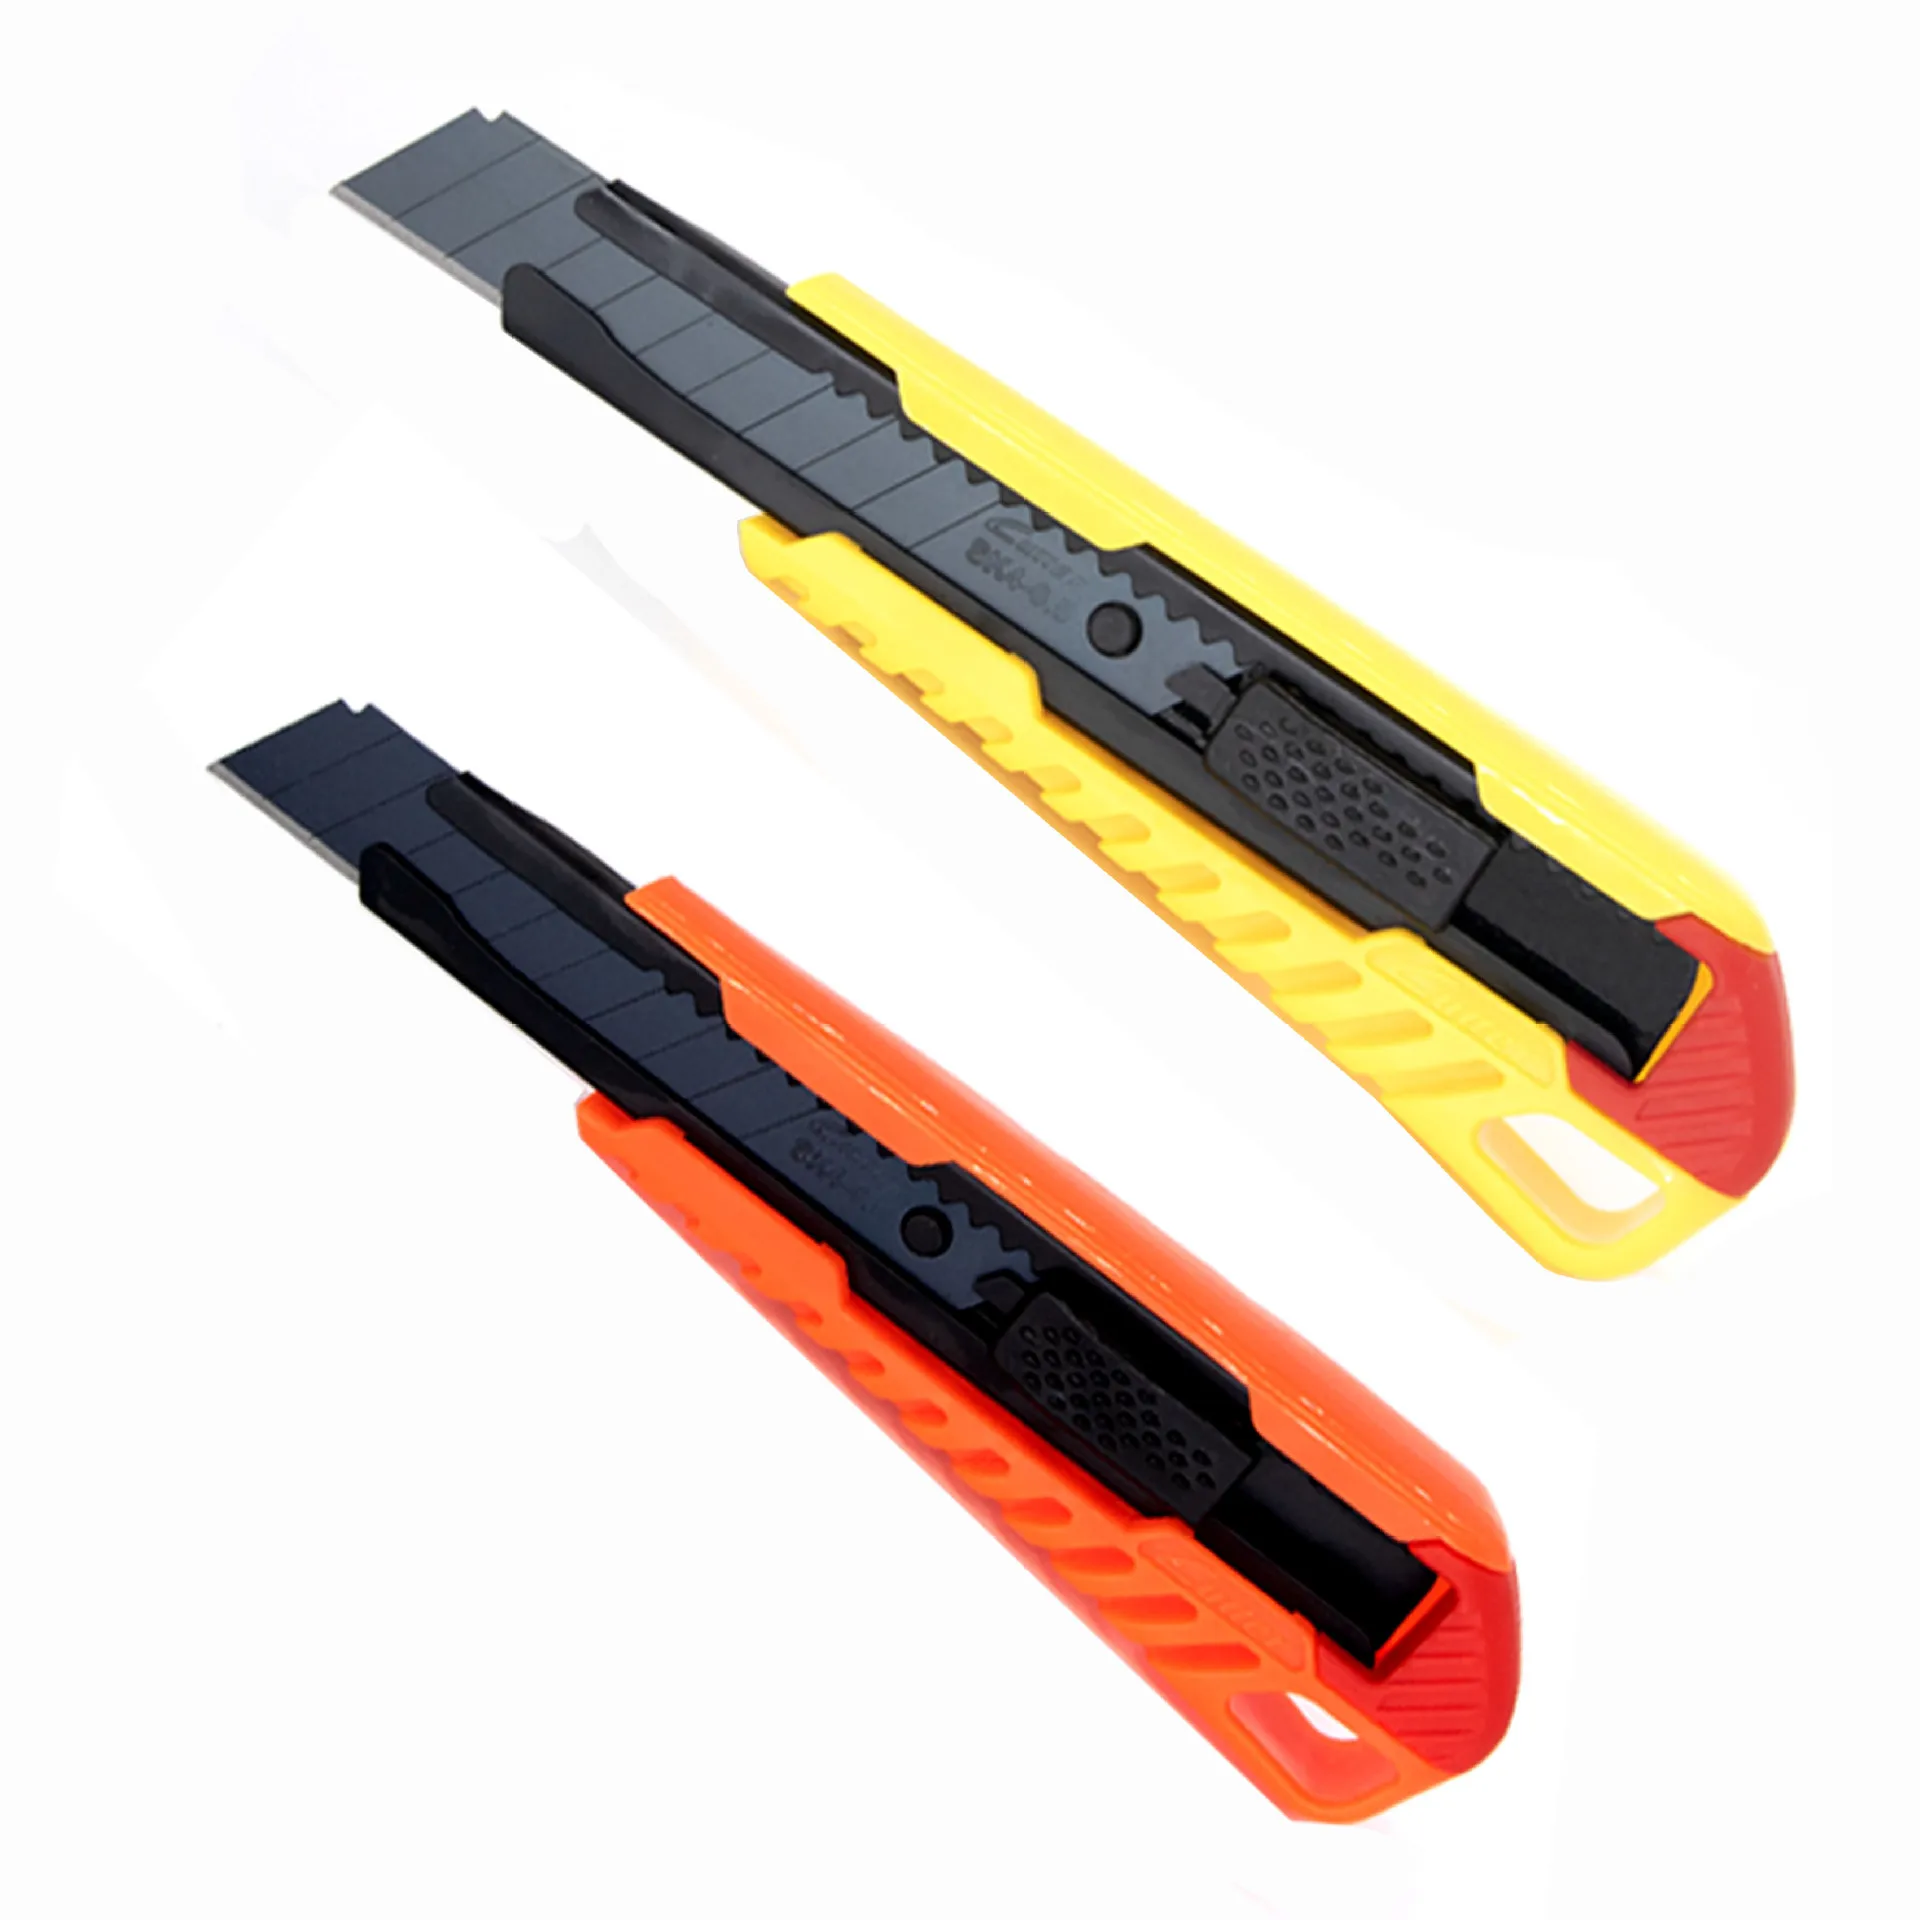 

Utility Knife Black Blade 18mm Stainless Steel Knife For Cutting Box Paper Quick-Change Blade Knife